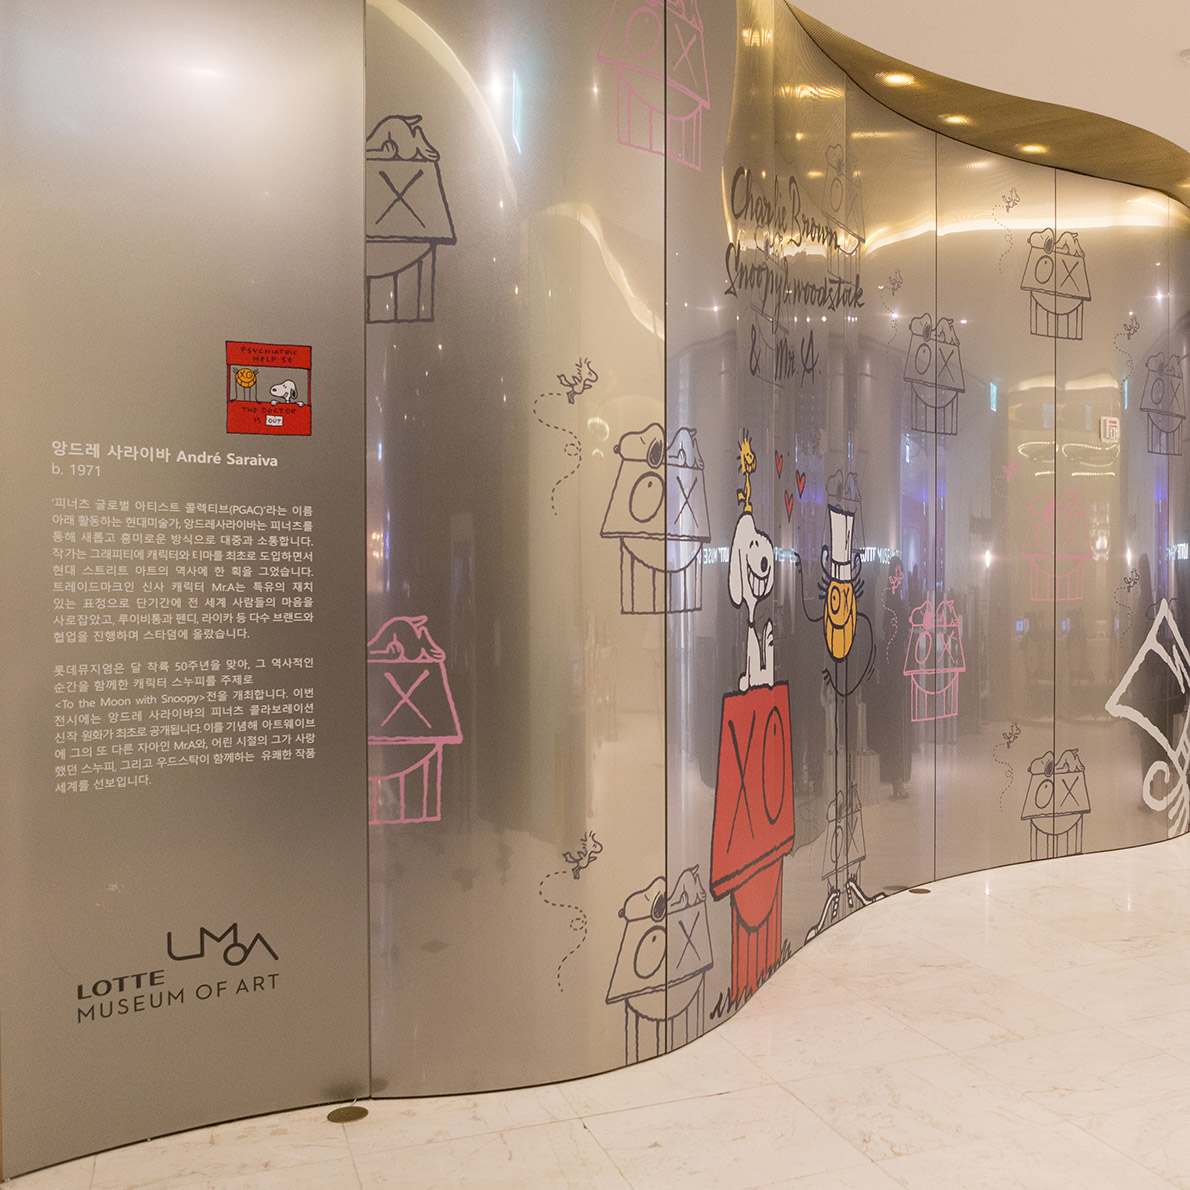 A stainless steel wall in an indoor space with text and illustrations on it.